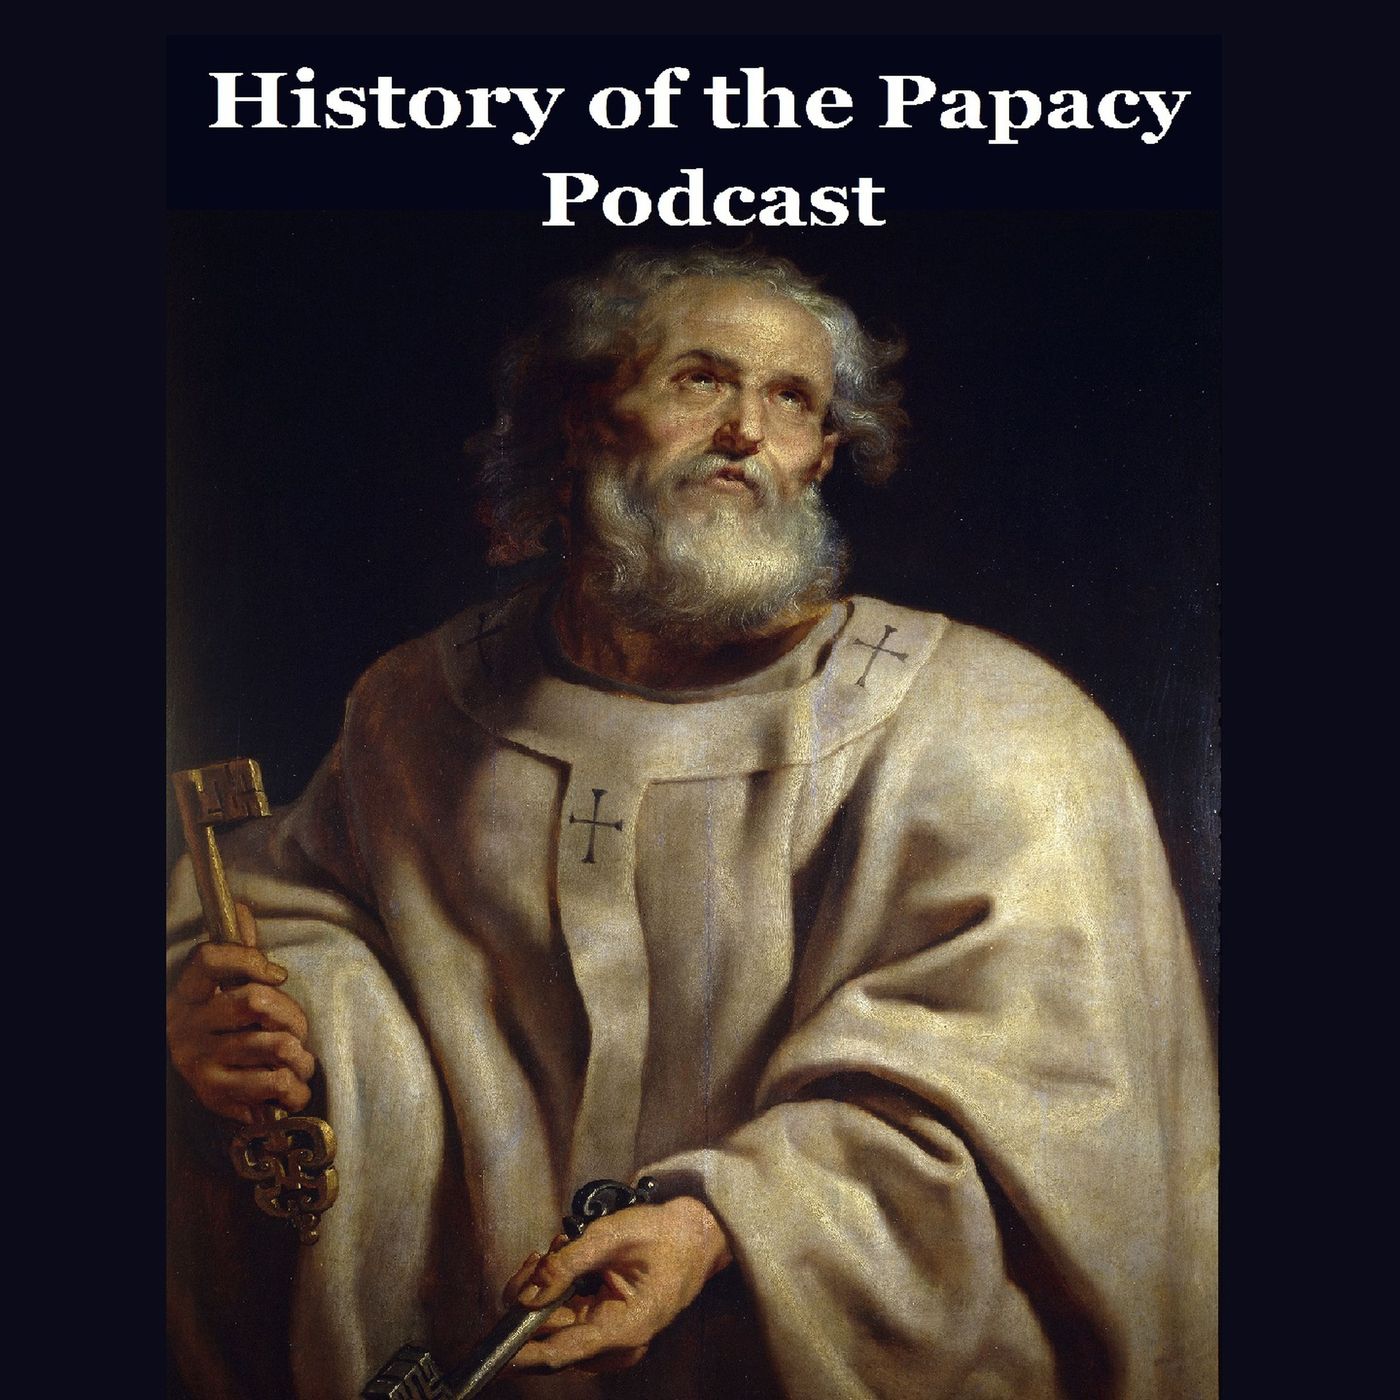 Episode 40: The Arian Century Part 2, Dueling Popes